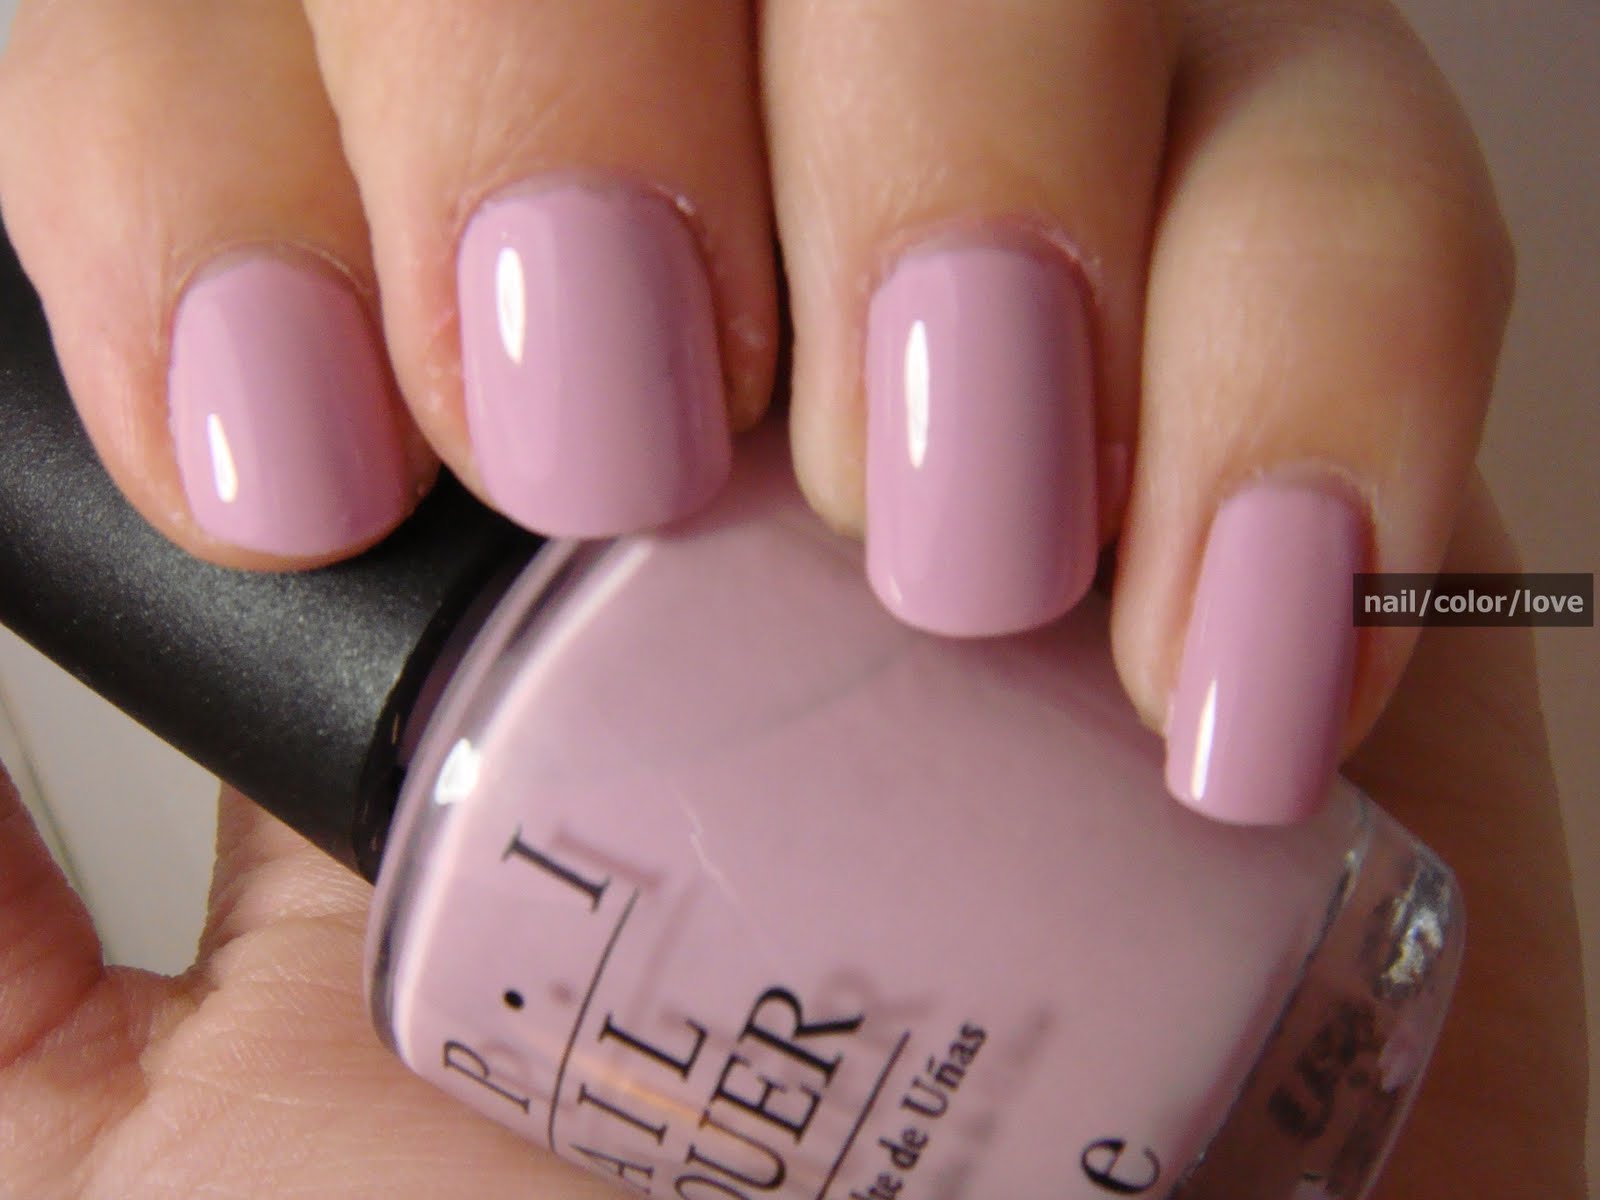 3. OPI Nail Lacquer in "Let's Be Friends!" - wide 6